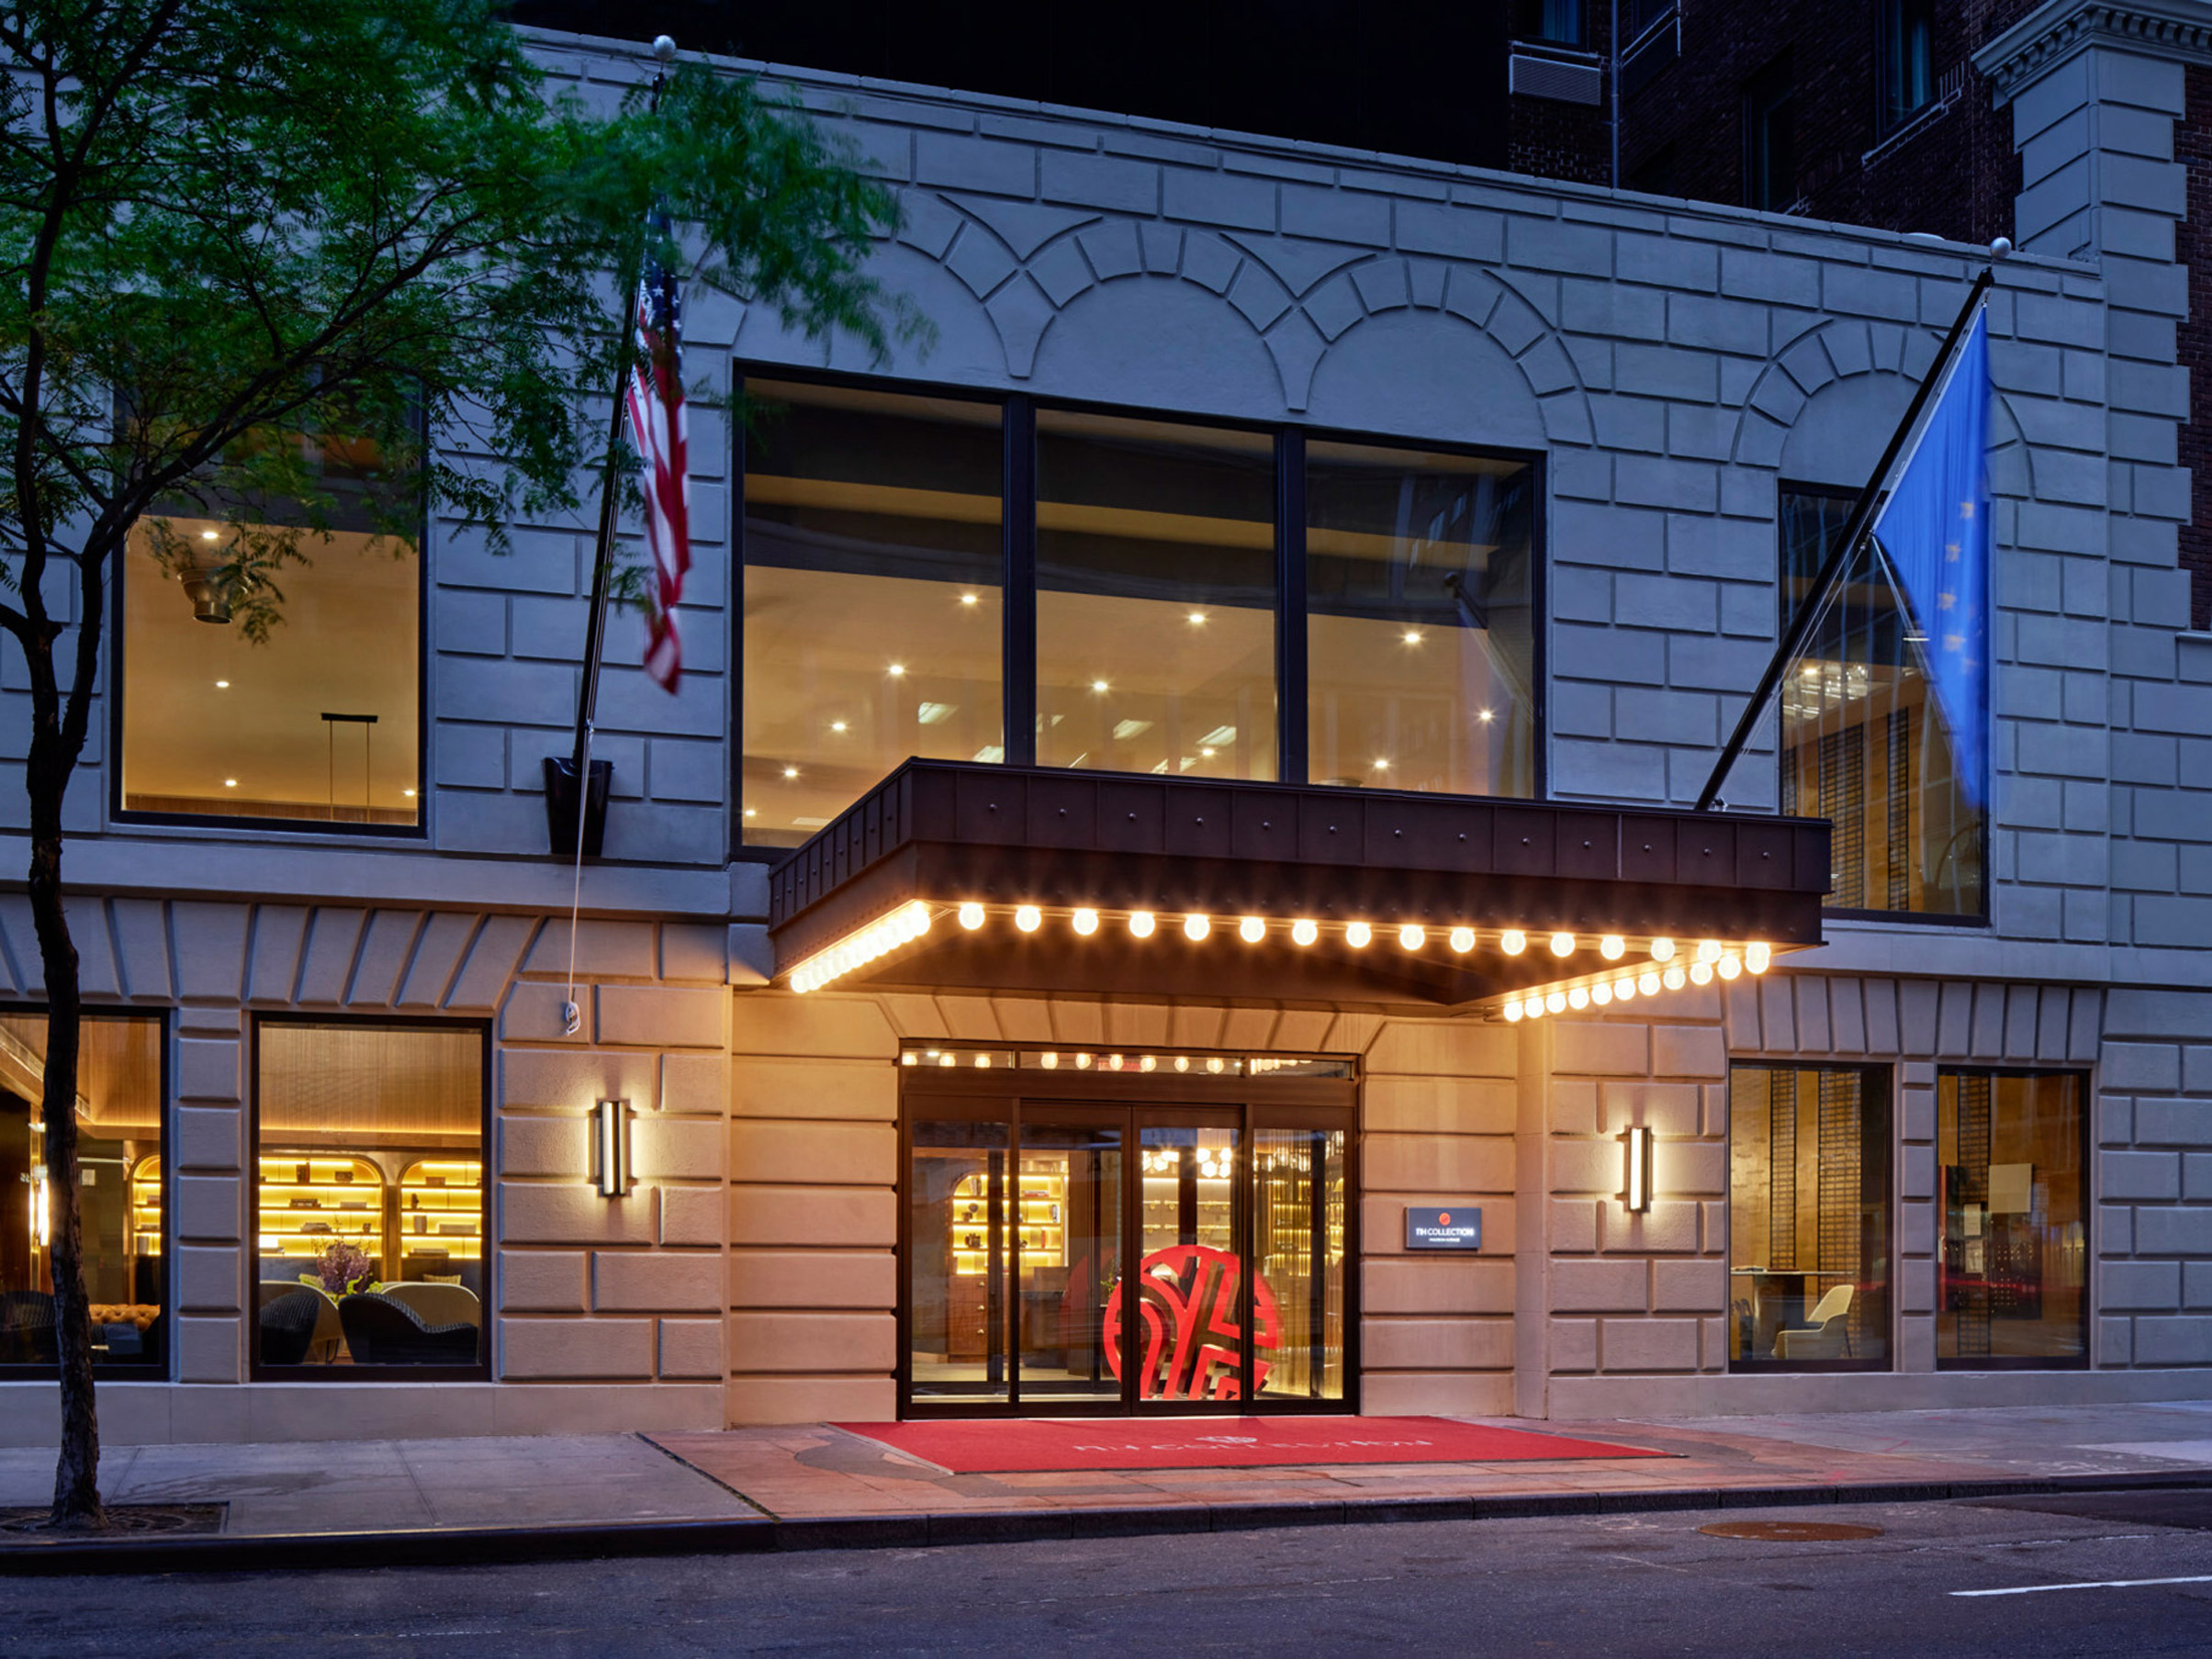 Exterior of a modern boutique hotel at dusk, showcasing an illuminated entryway with a red carpet, underlit awning, and a distinctive red sculpture visible through the glass doors.